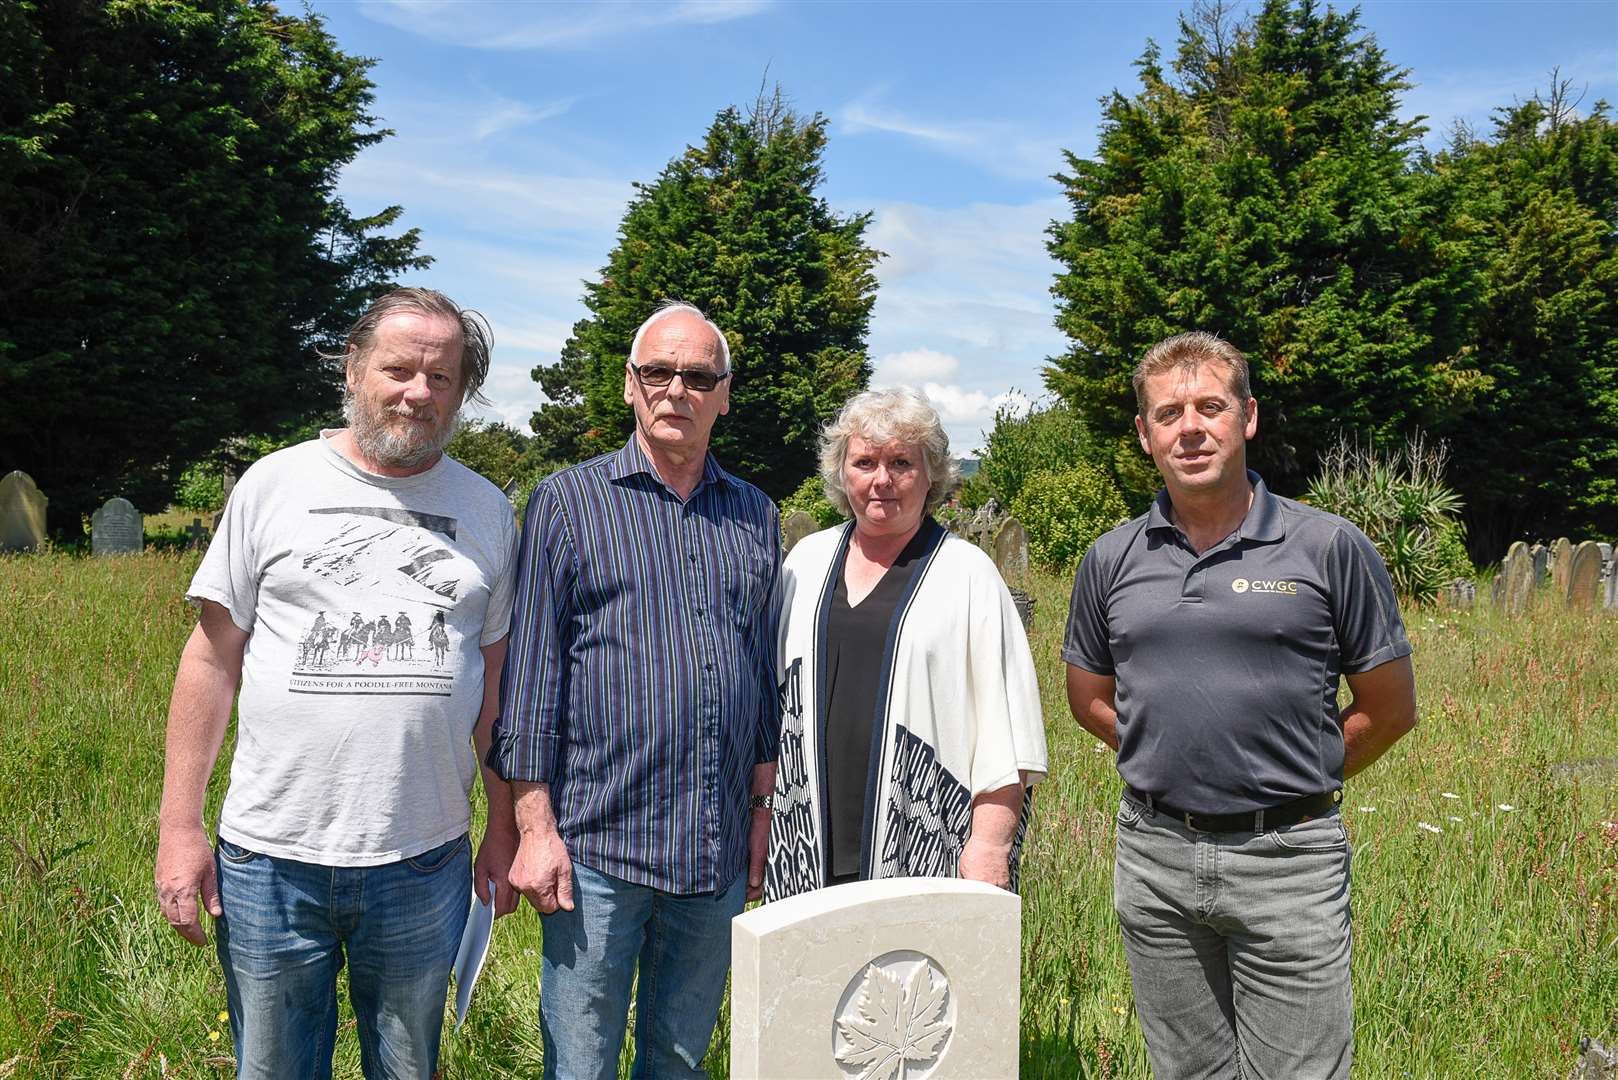 Local historian Peter Anderson, Richard Grundy, Cllr Jan Holben and Les Kibble of the Commonwealth War Graves Commission